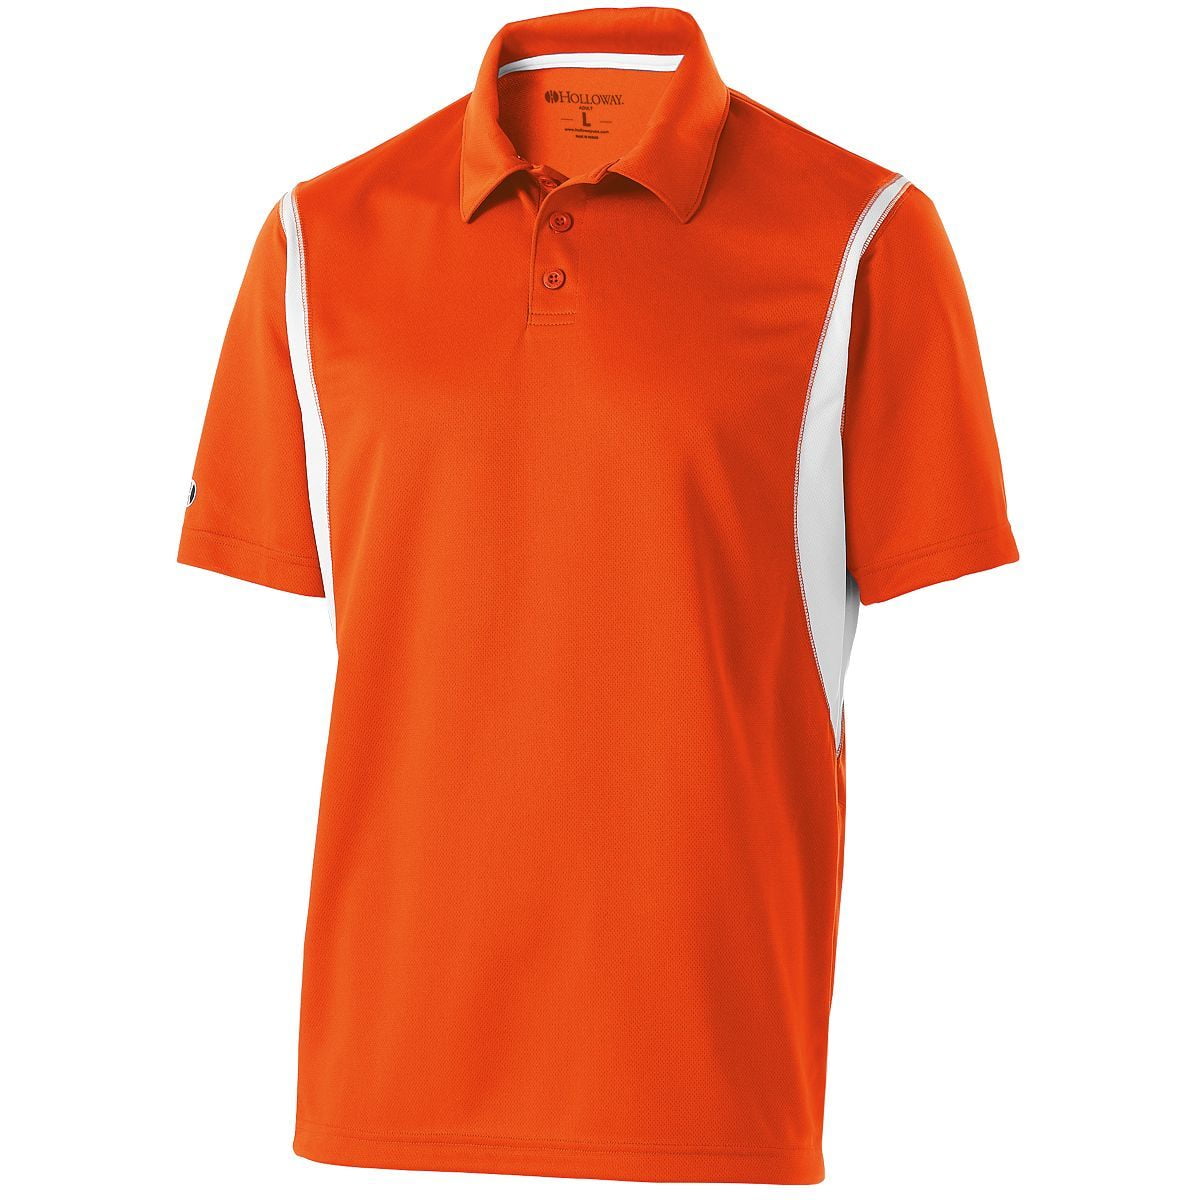 Holloway Dry-Excel 4.0 Ounce 100% Polyester Wicking Integrate Polo 222547 S-5XL 